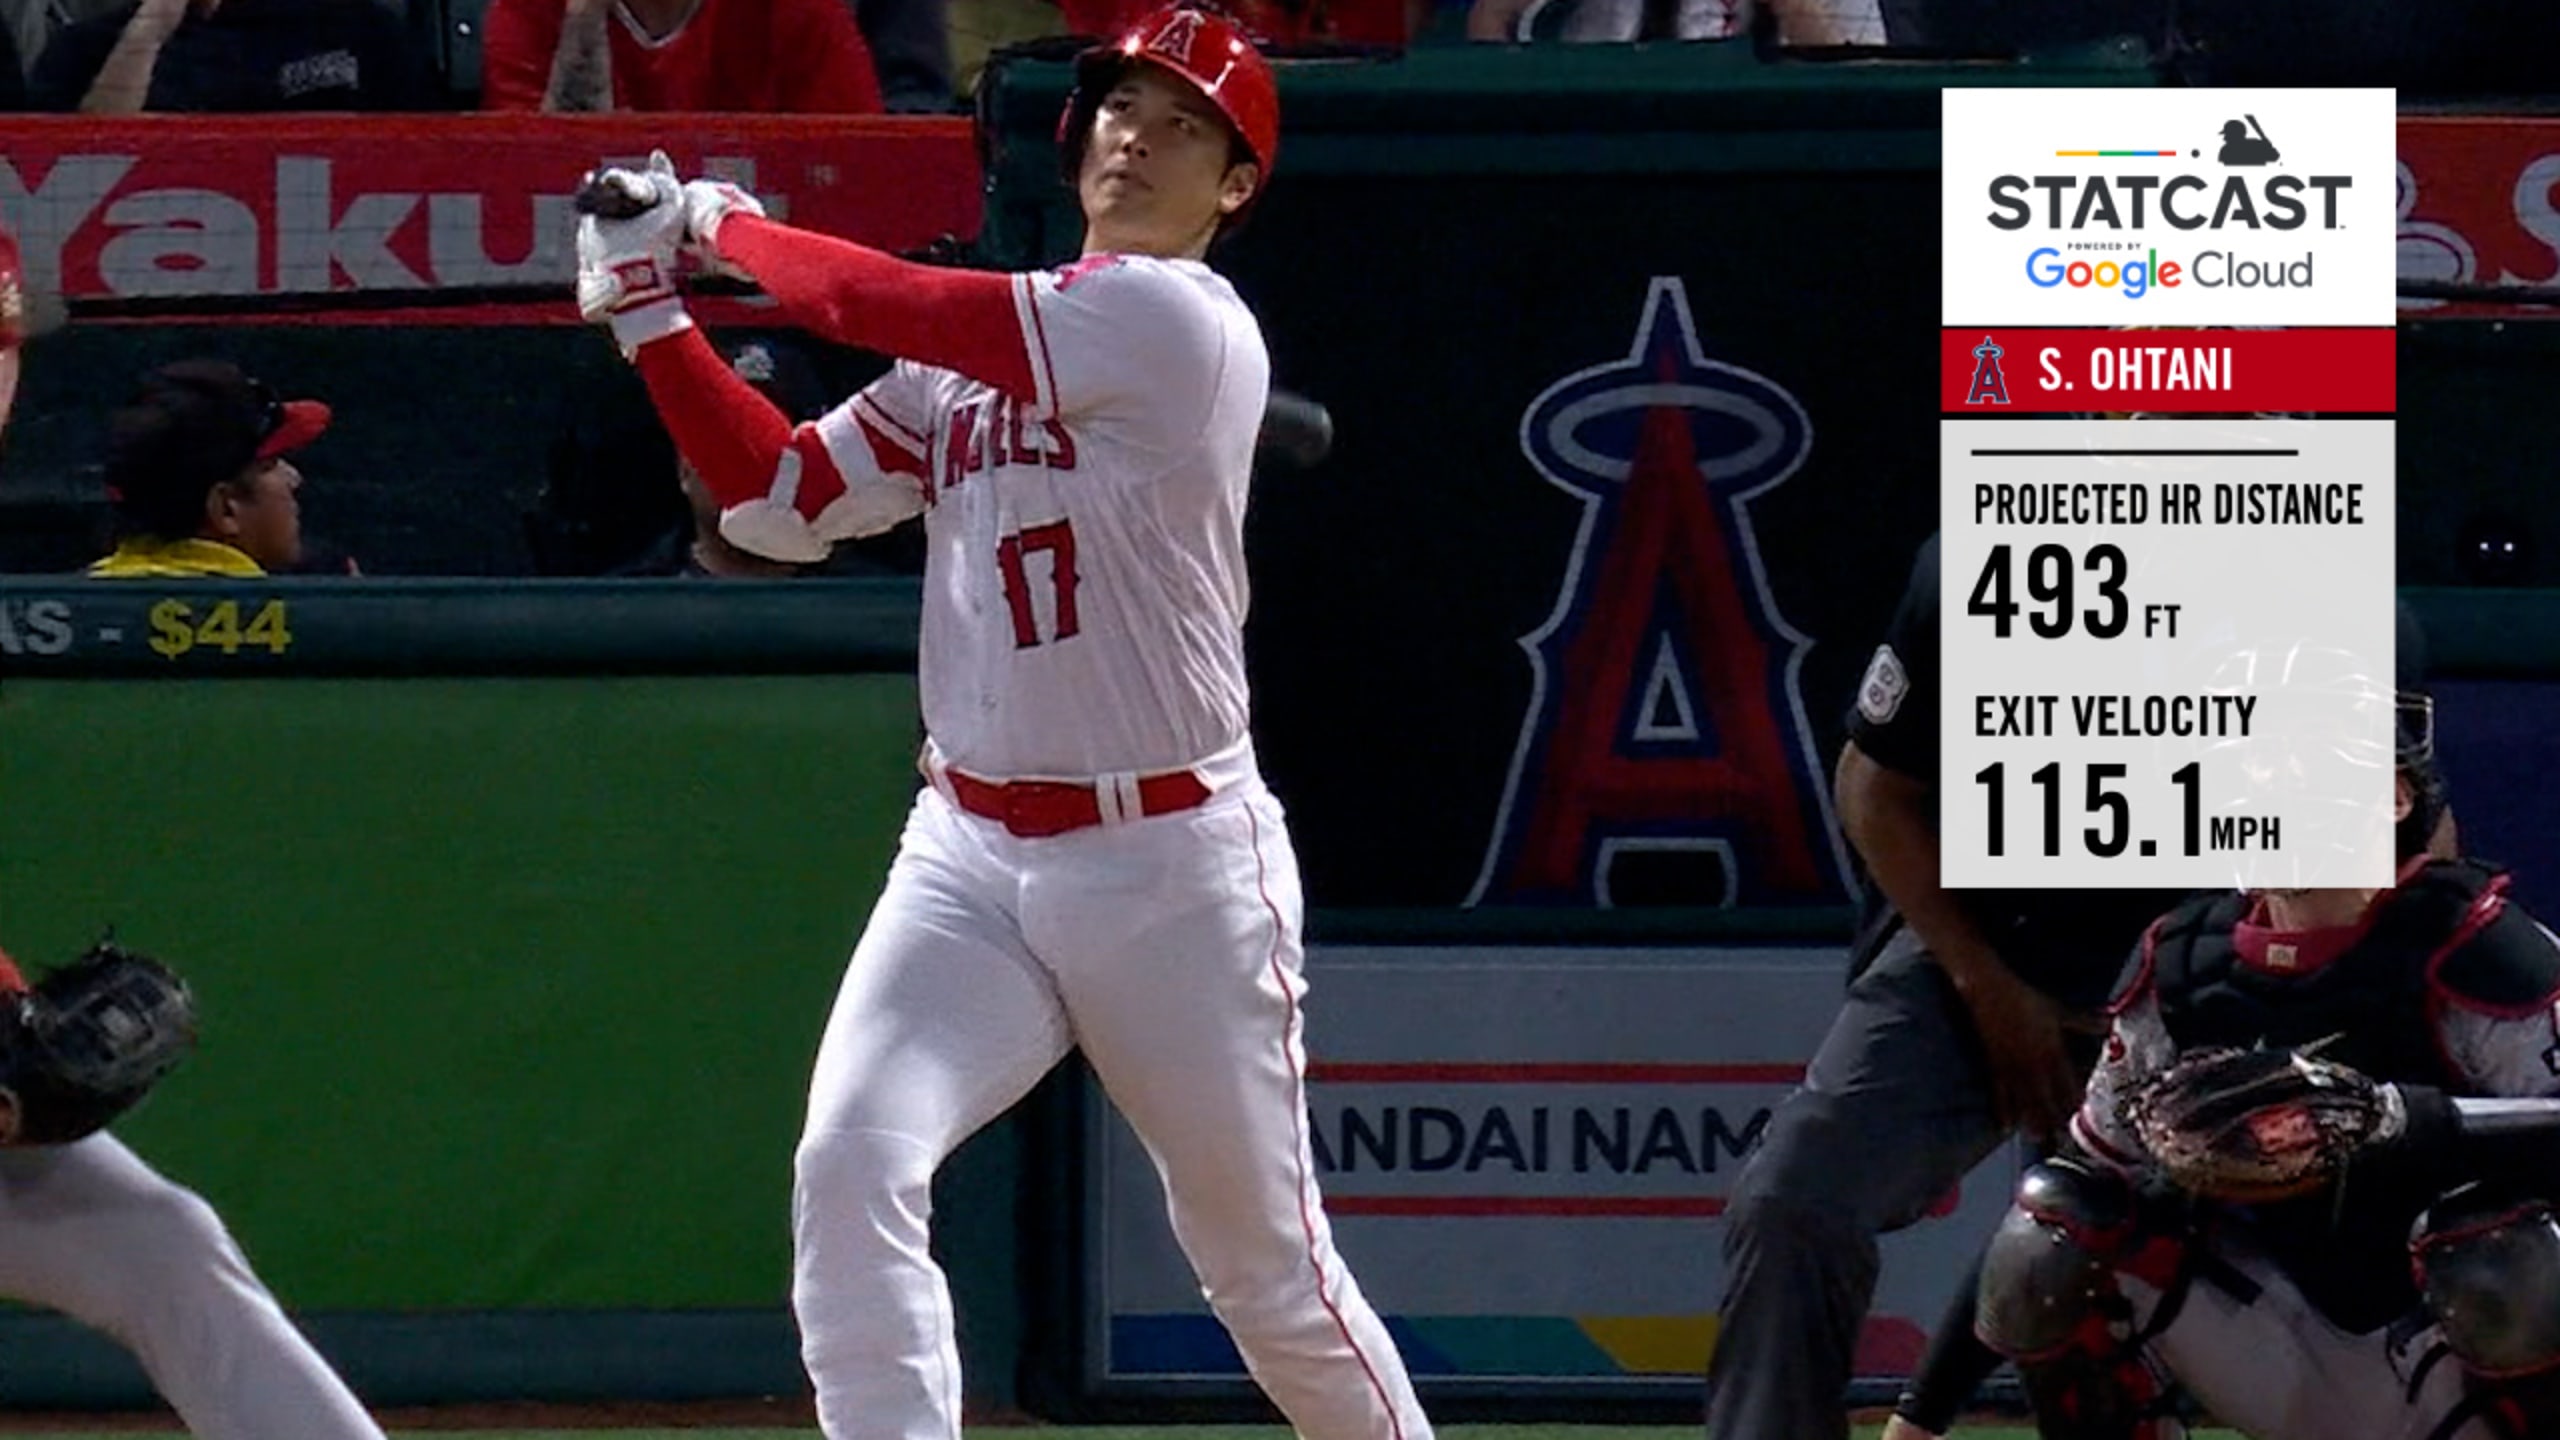 Angels superstar Shohei Ohtani just had the best June in MLB